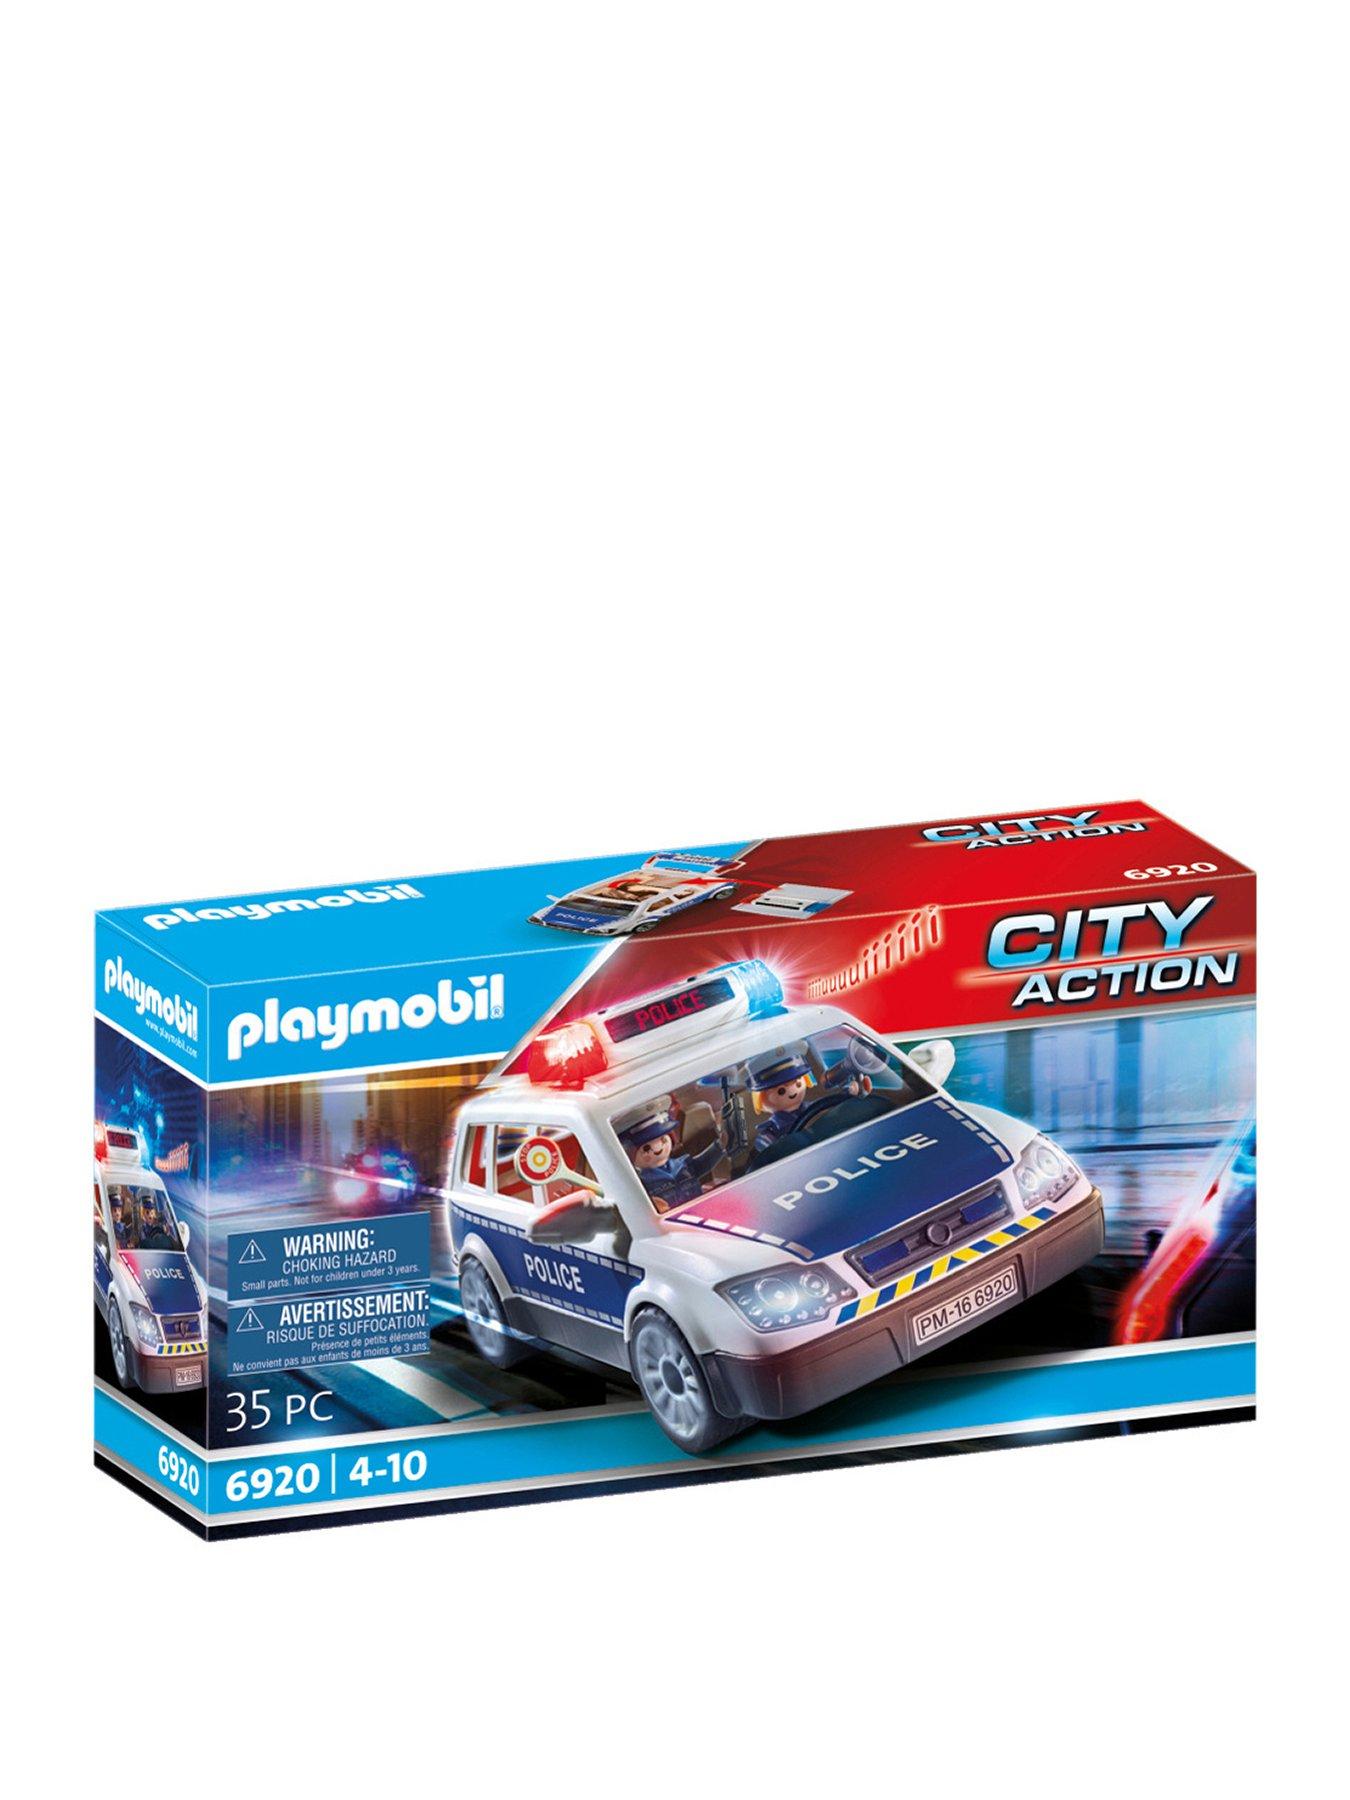 Playmobil 6920 City Action Squad Car with Lights and Sound | very.co.uk